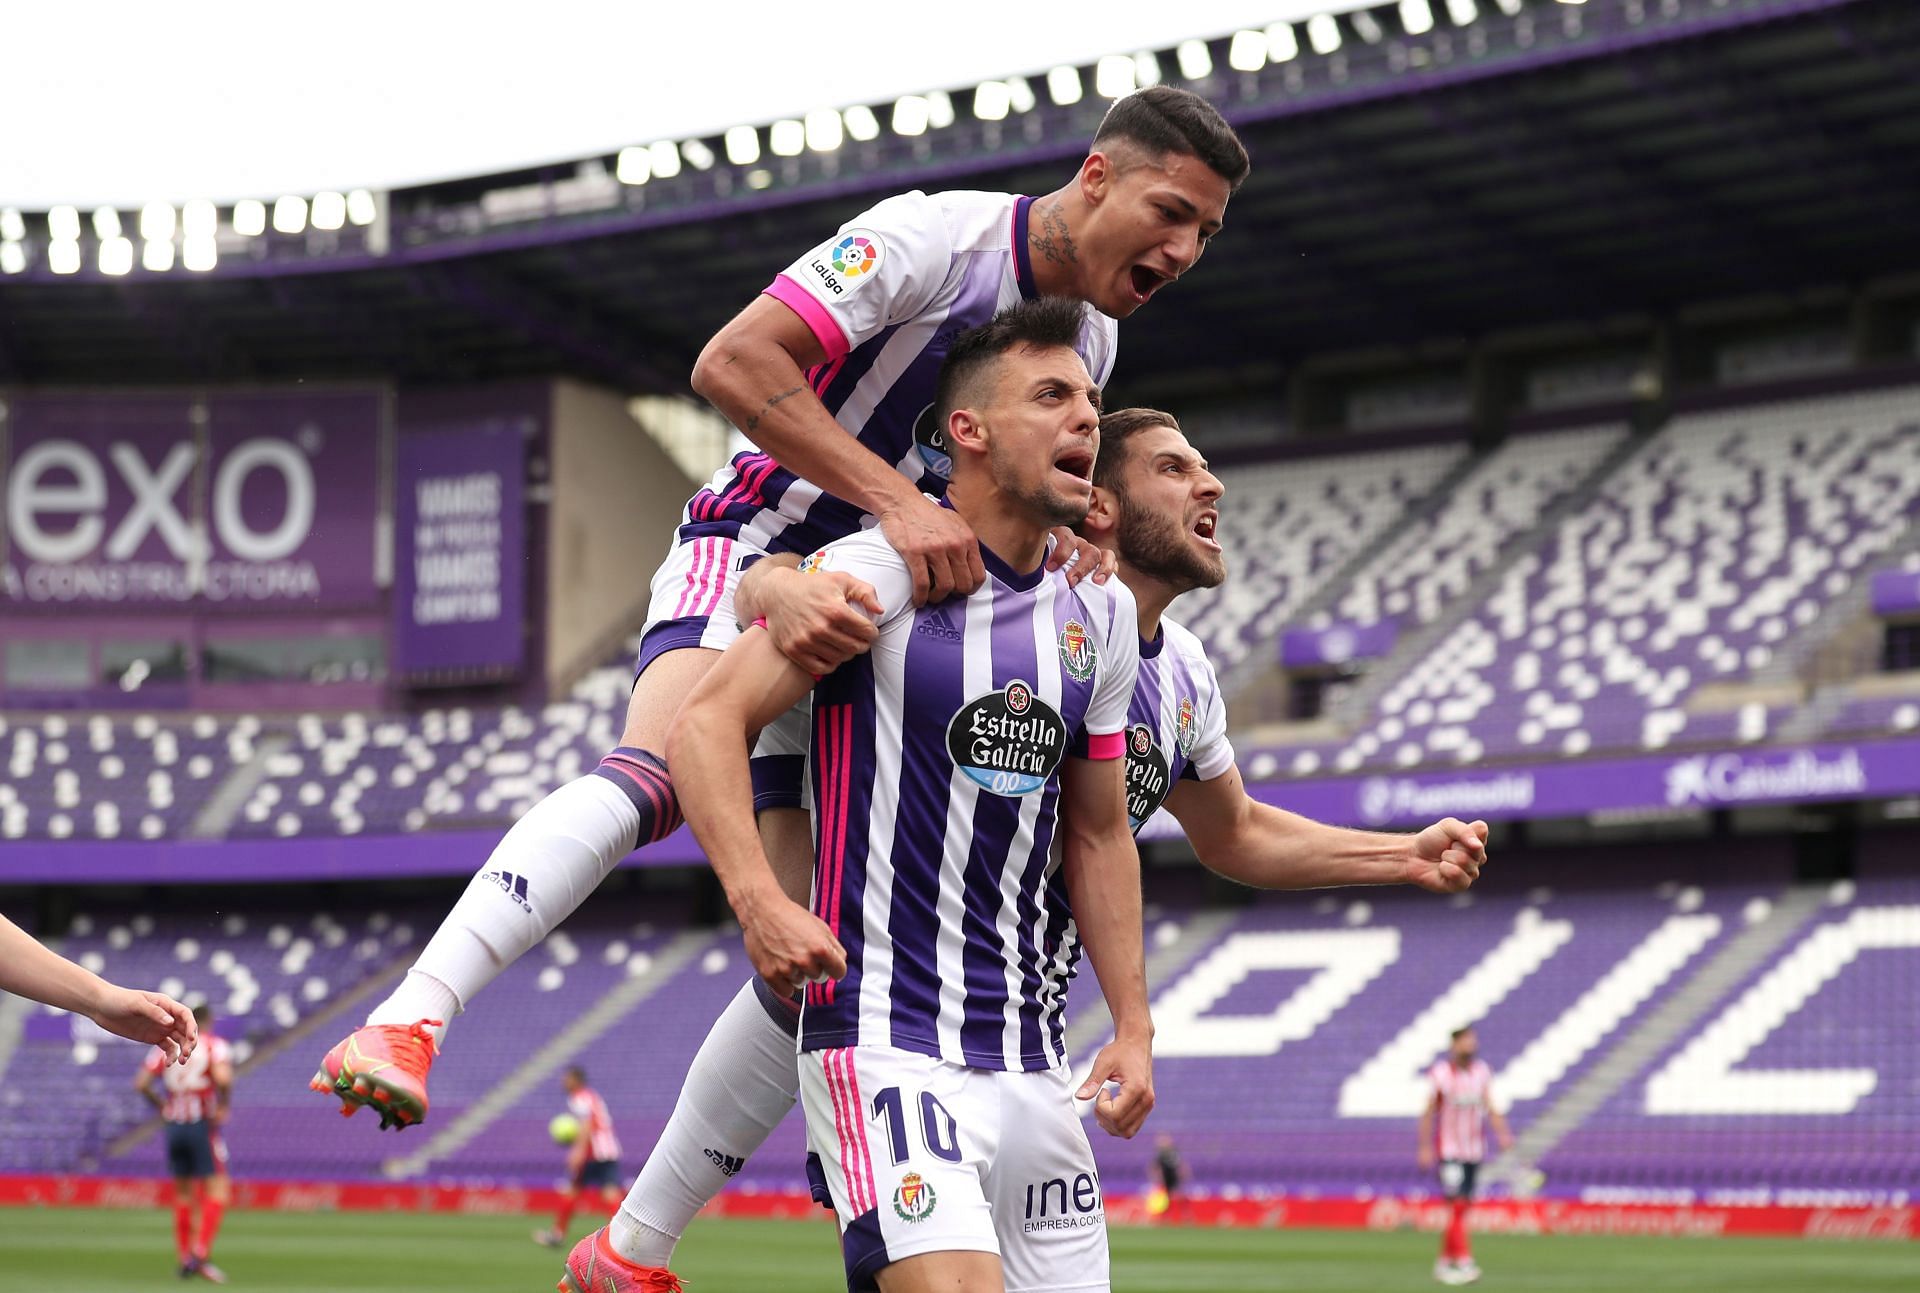 Real Valladolid will face Sporting Gijon on Friday